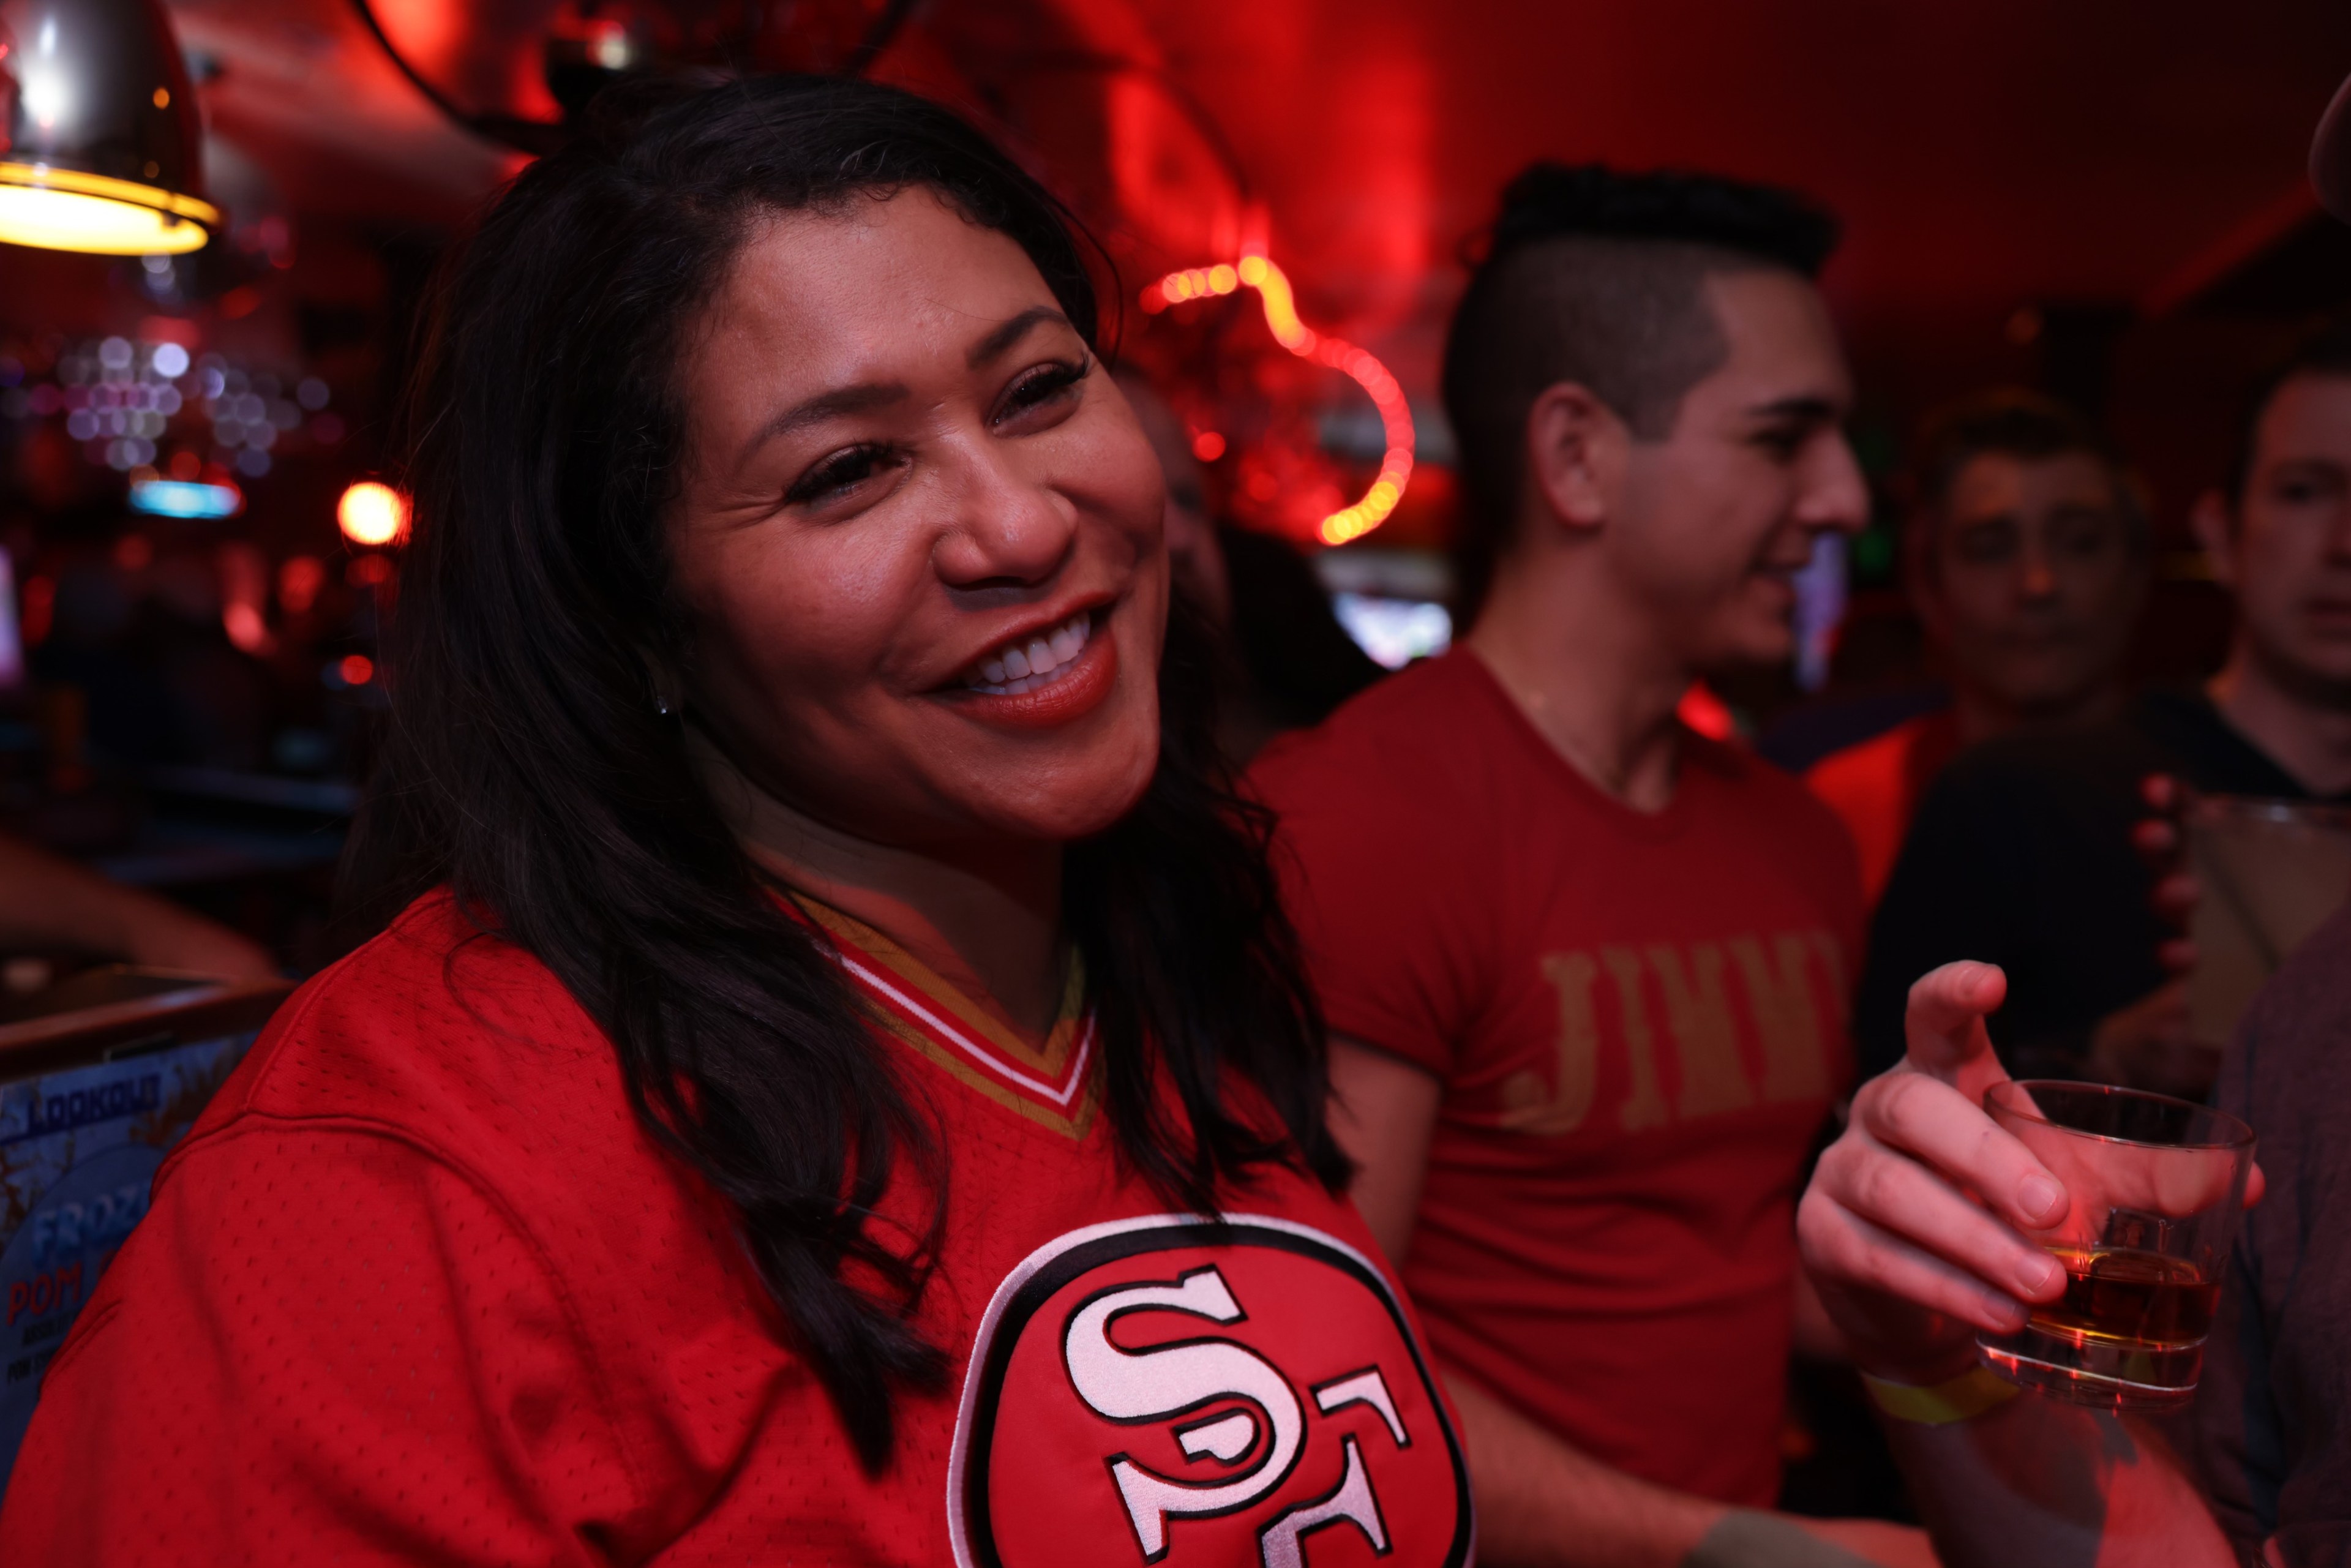 A smiling woman in a red sports jersey holds a drink in a bar with others nearby.